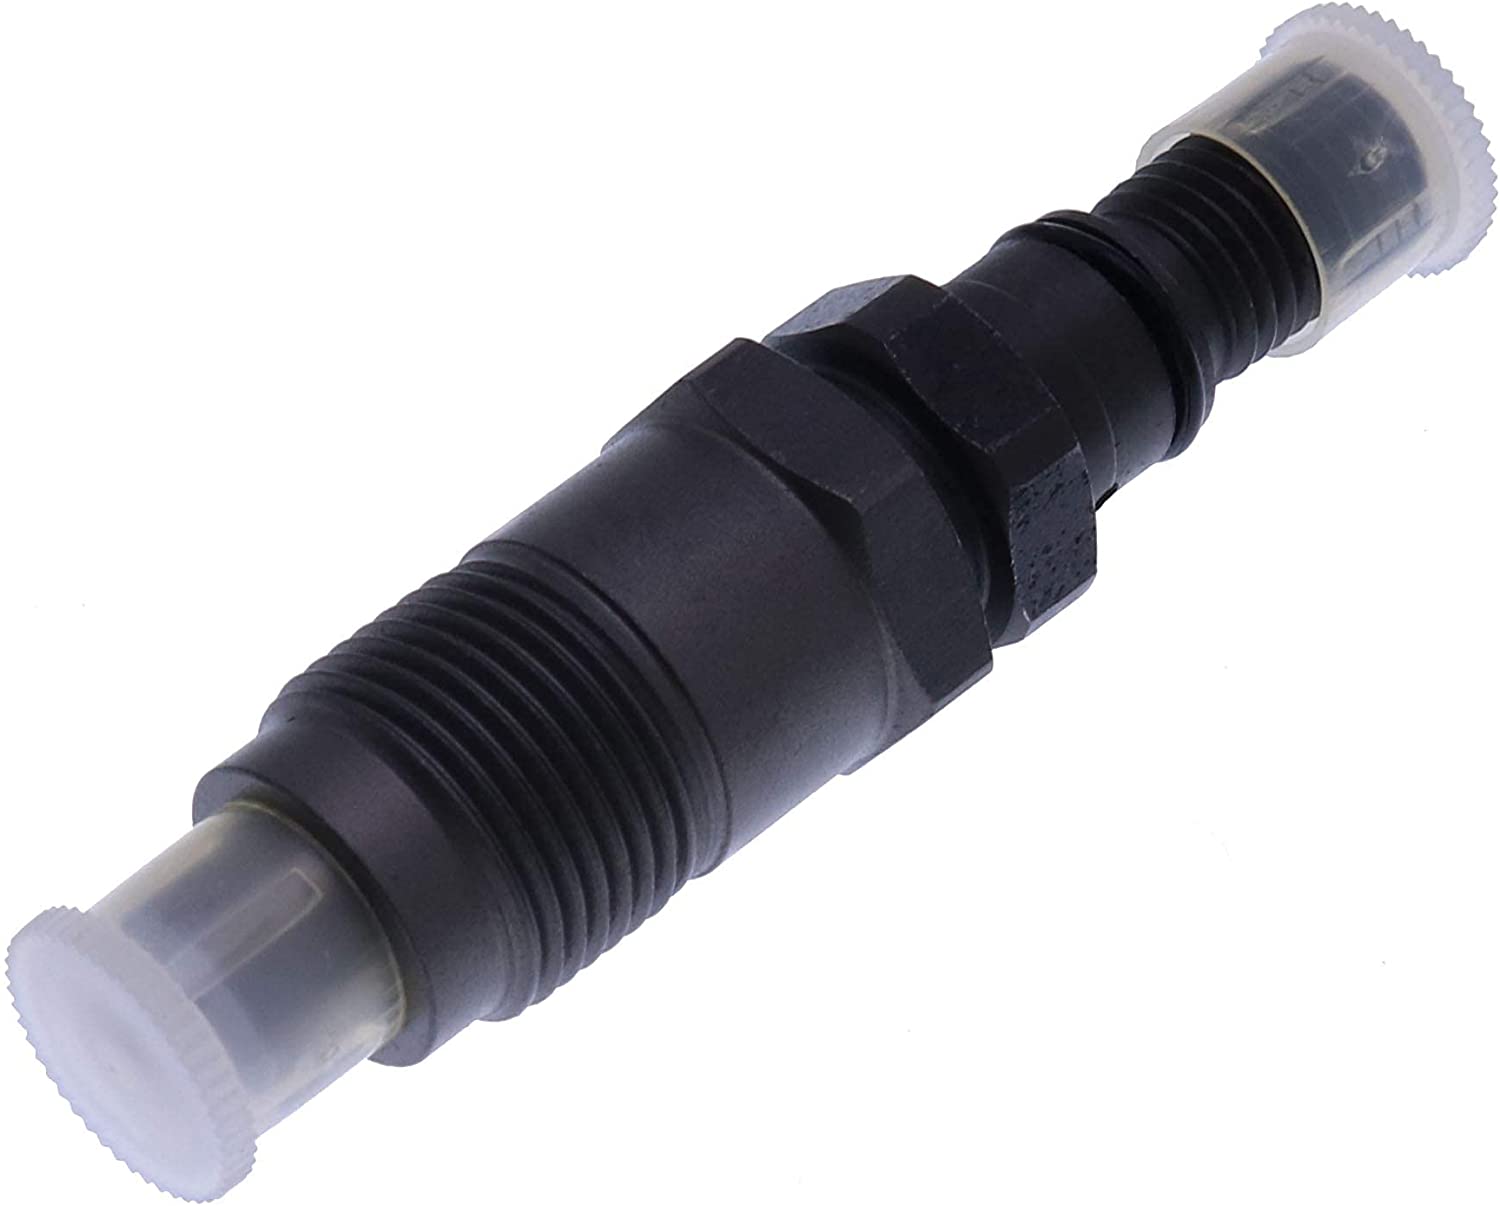 Fuel Injector AM879688 Compatible with John Deere 1435 2210 2020 2030 4010 4100 4110 415 425 445 455 655 670 755 756 770 855 856 F915 F925 F935 Gator 4x2 6x4 HPX X495 X595 - KUDUPARTS